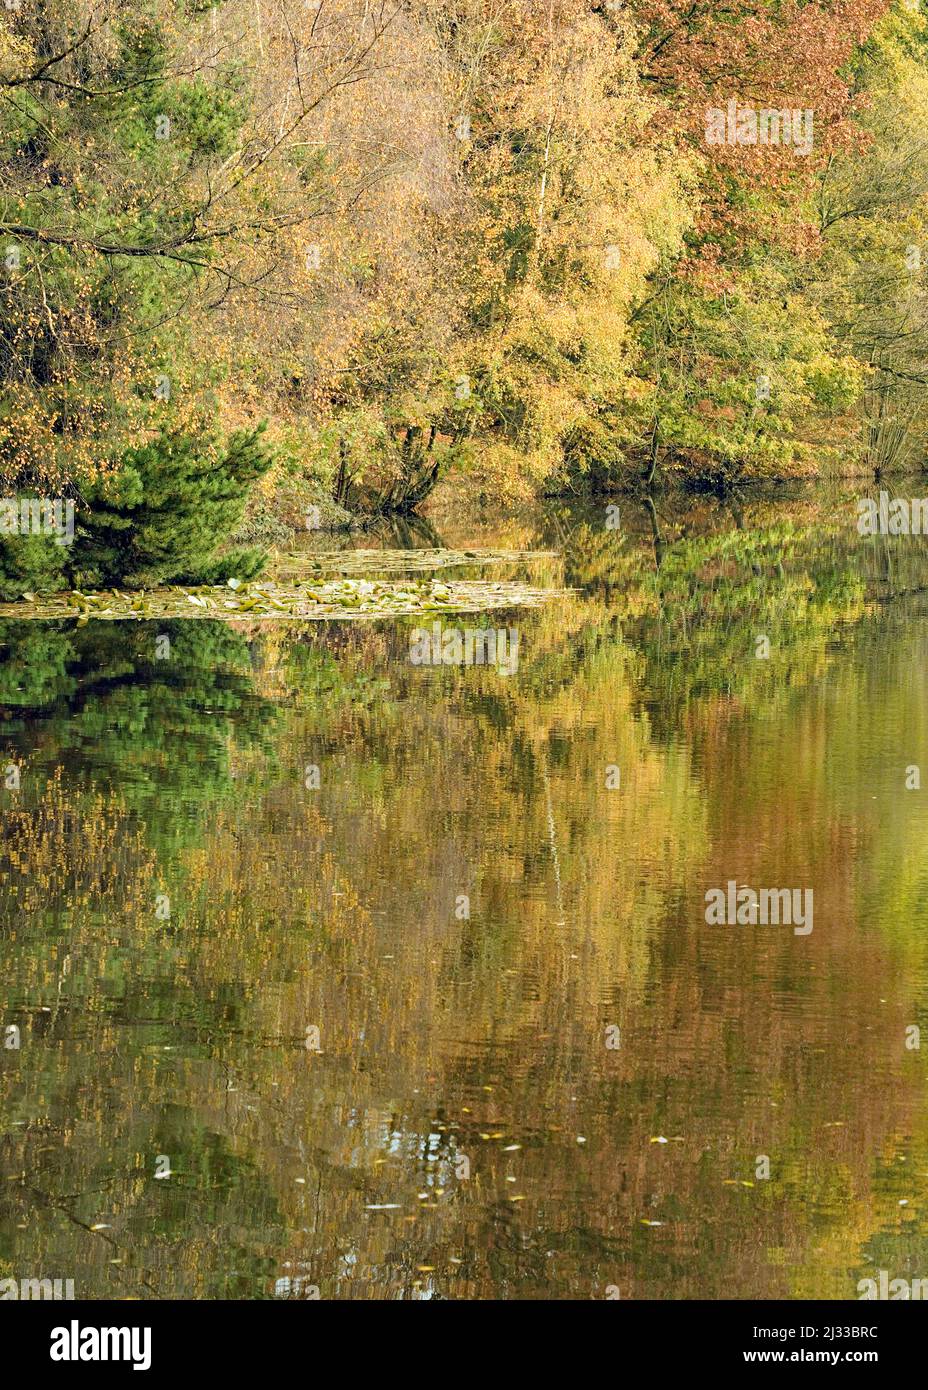 Autumn in Fair Oak valley showing one of the three major forest pools with trees displaying their beautiful autumnal hues and tints on Cannock Chase Stock Photo